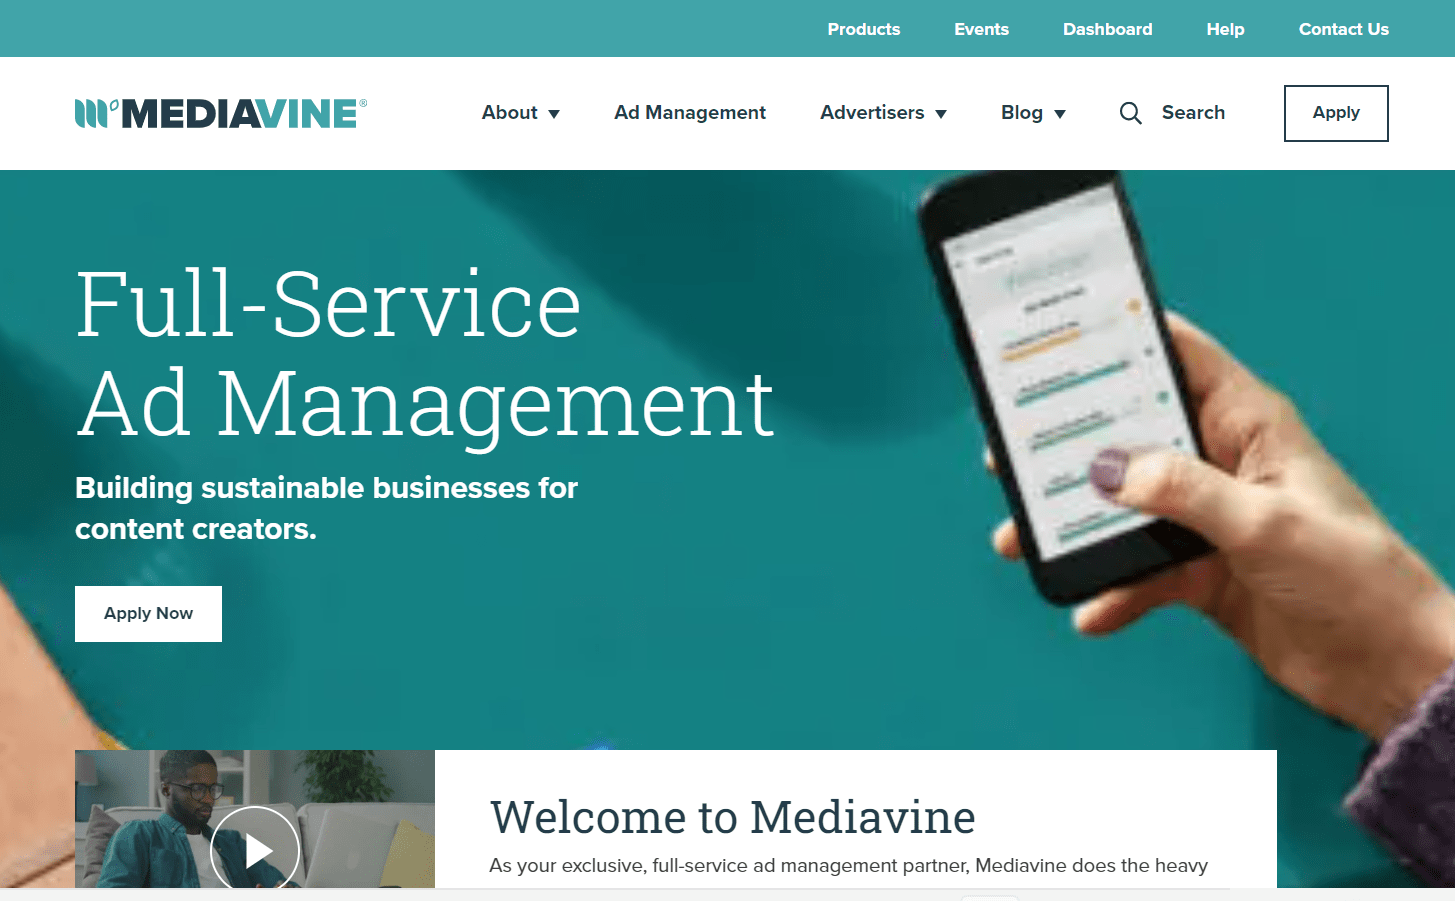 About Mediavine Requirements